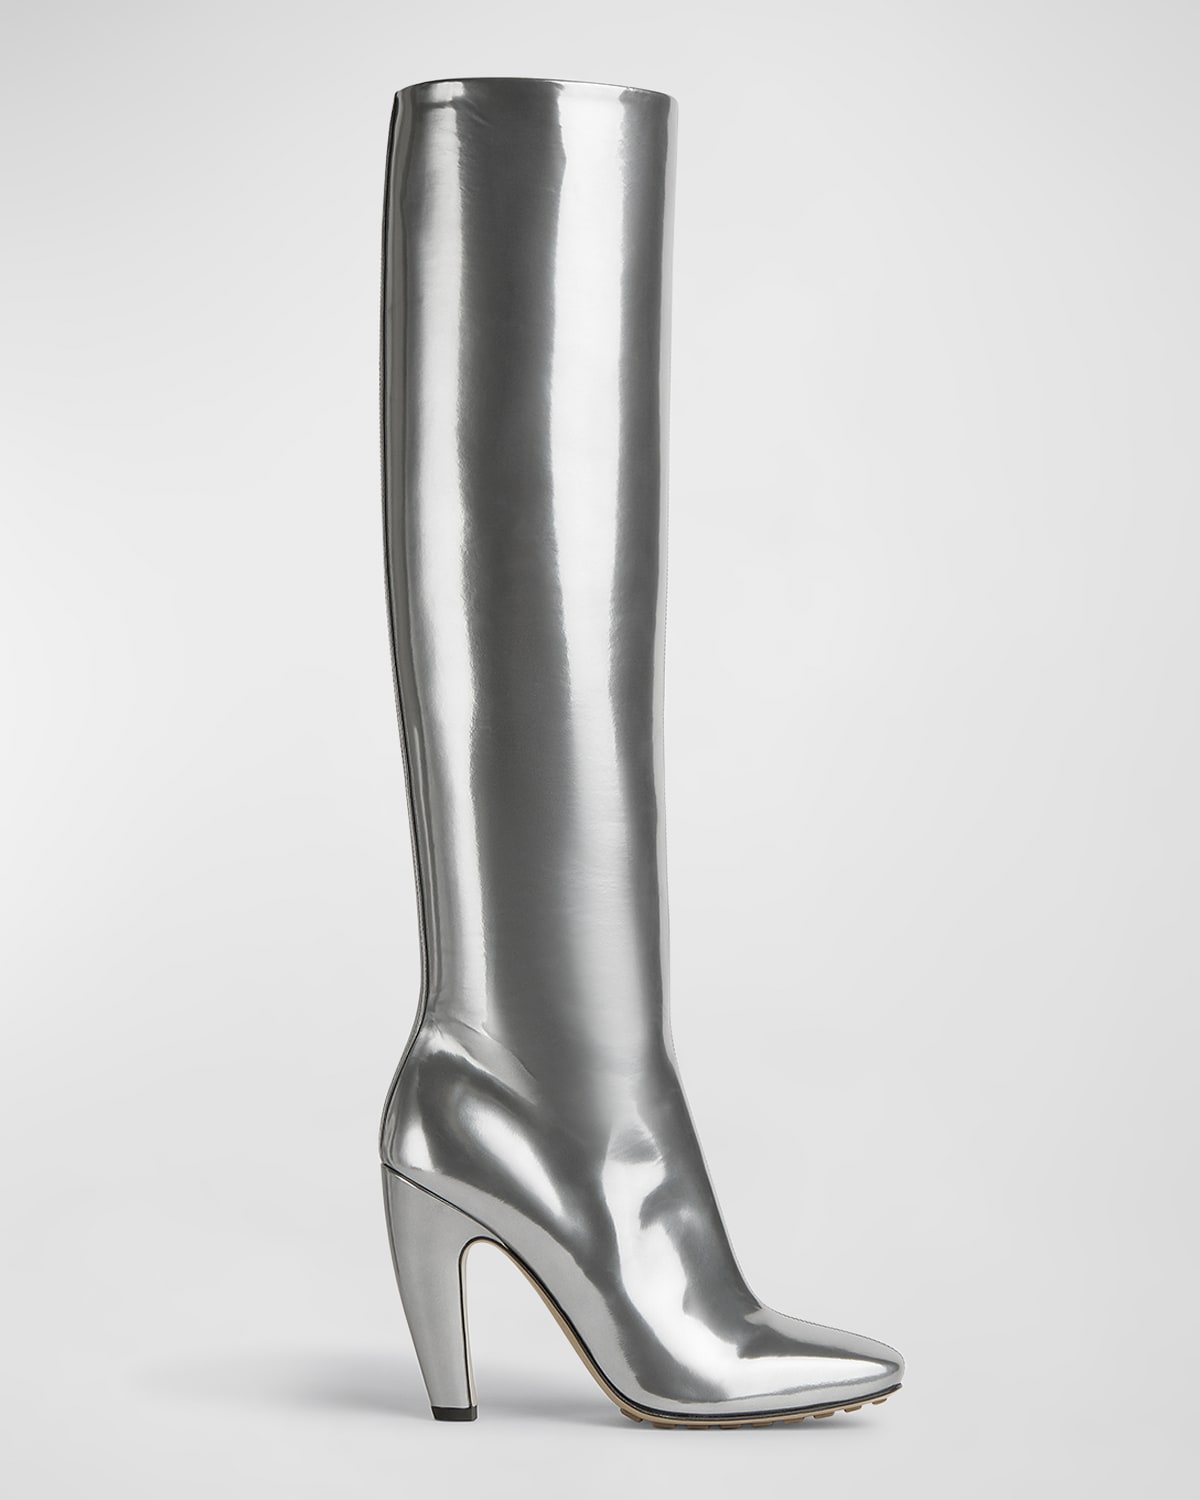 Mirror Leather Knee High Boots